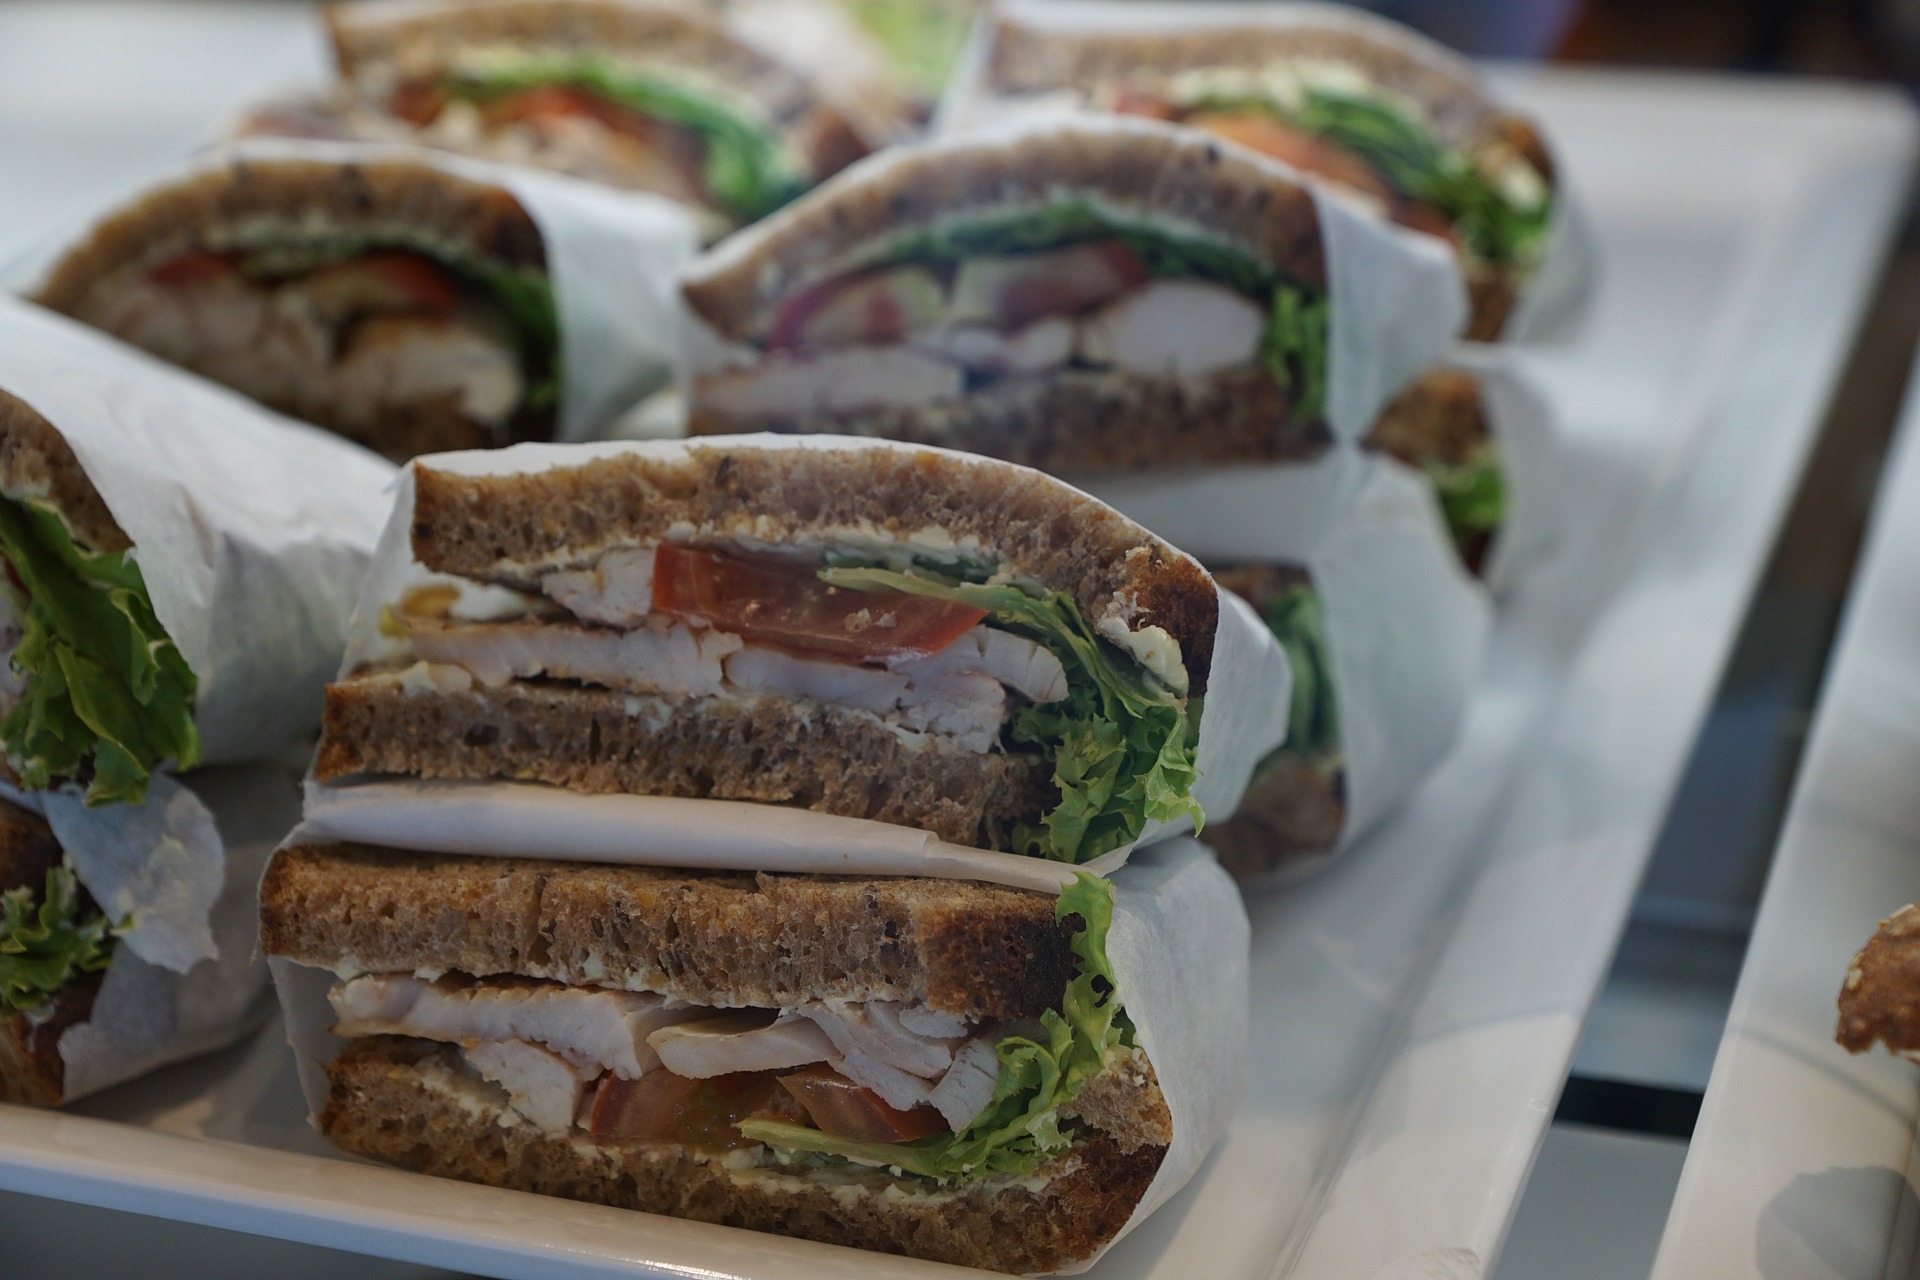 The Versatility of Sandwiches for Delis, Prepared Food Departments and More